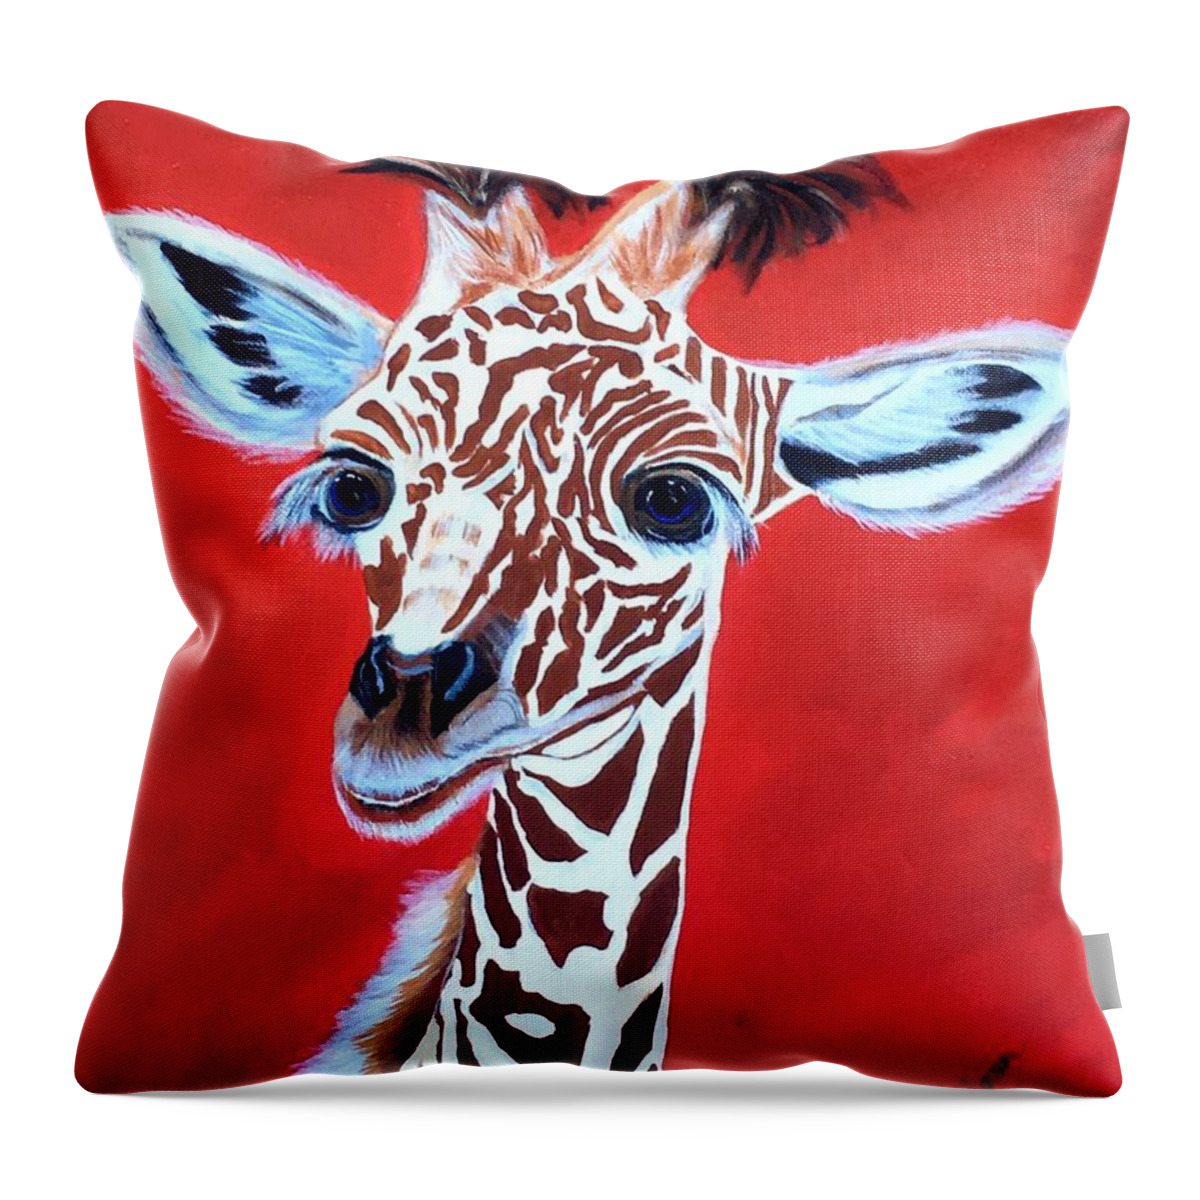  Throw Pillow featuring the painting Gerry the Giraffe by Bill Manson